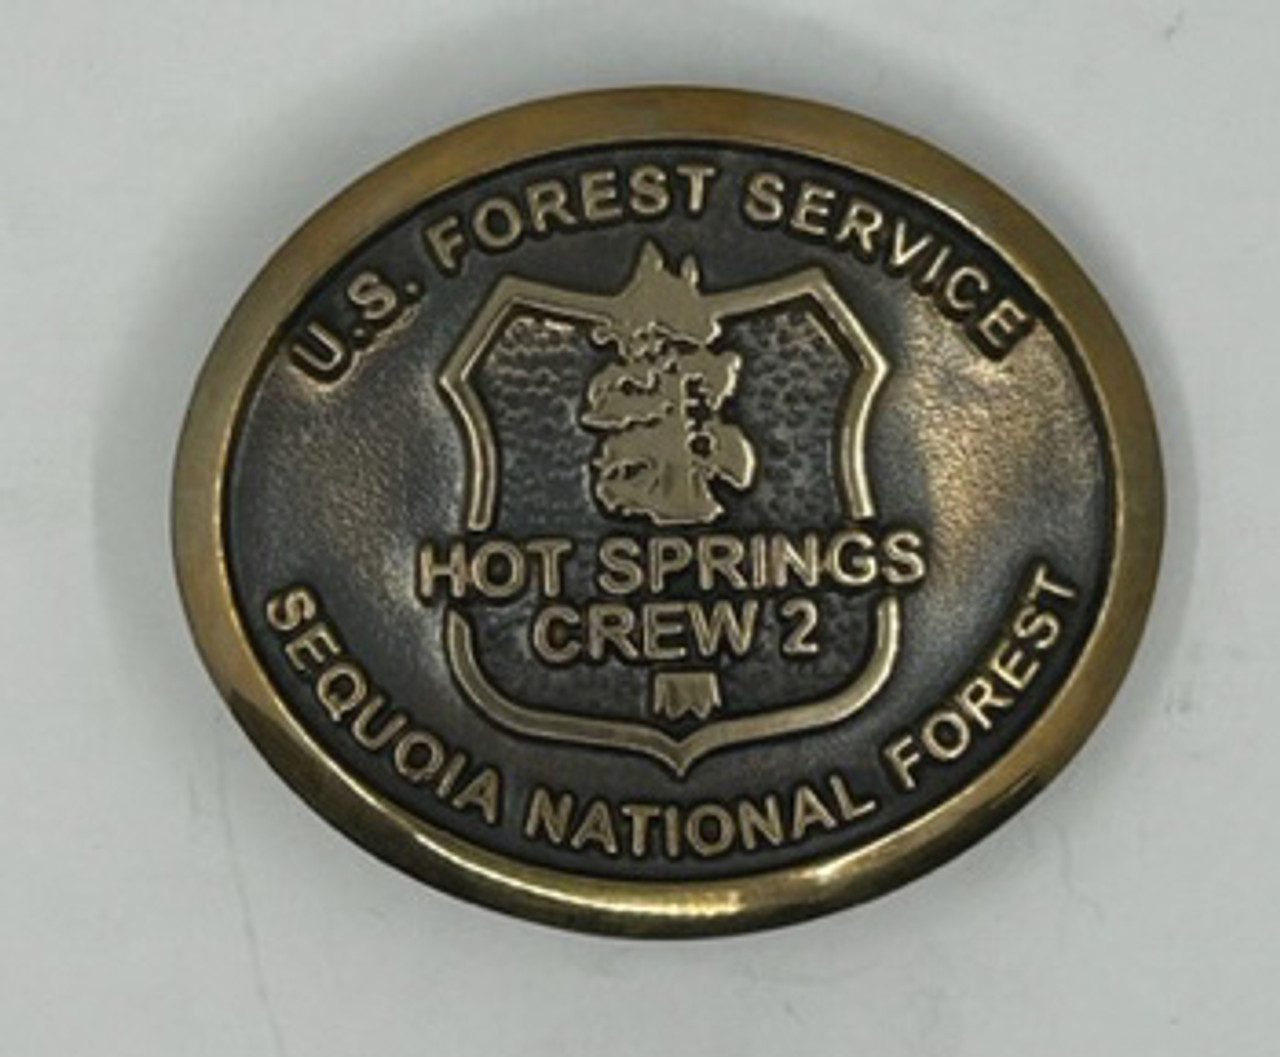 Hot Springs Crew 2 Sequoia National Forest Buckle (RESTRICTED)